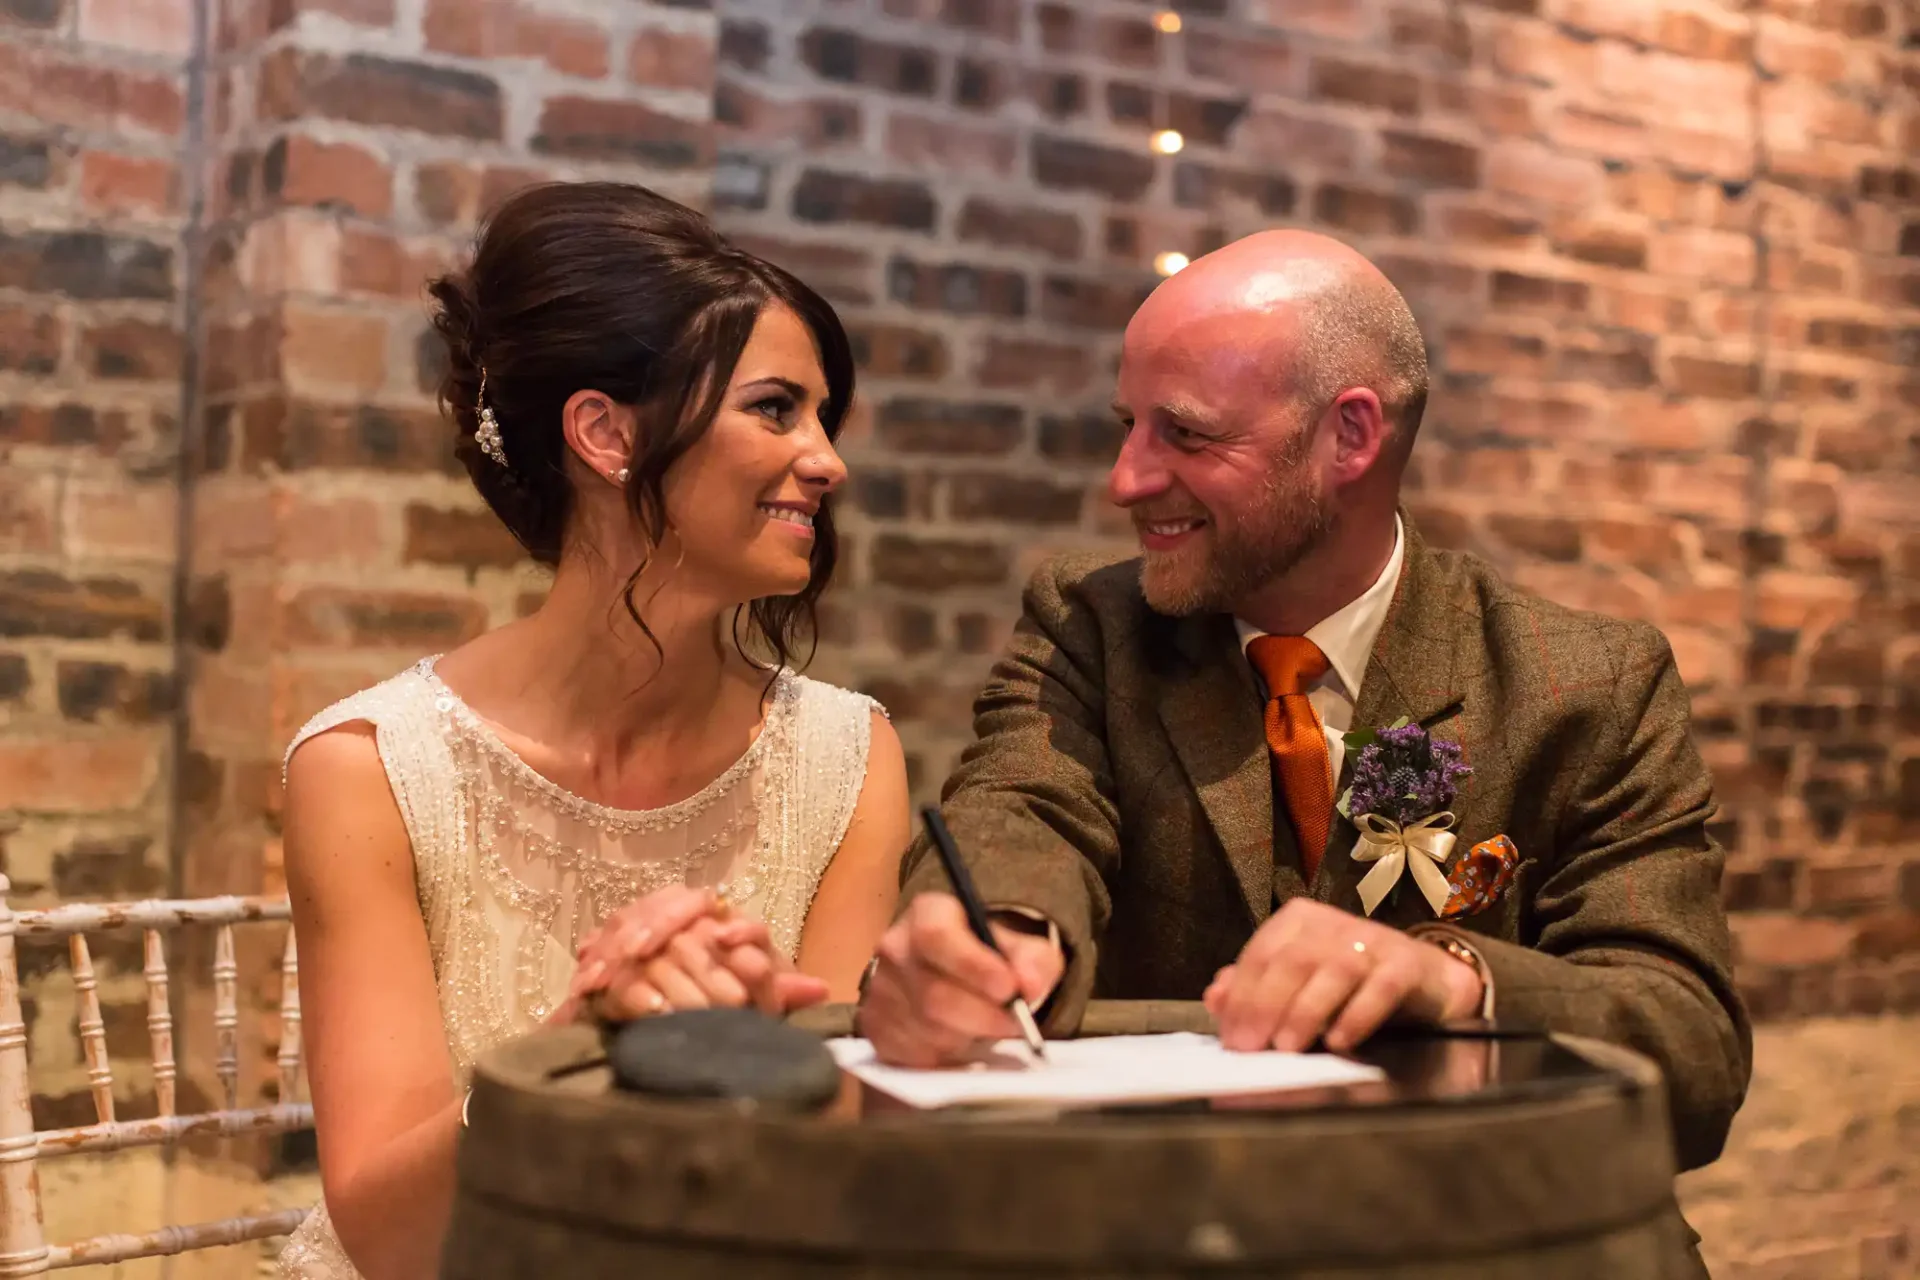 Bride and groom smiling at each other while signing a document, seated at a barrel table in a room with brick walls.